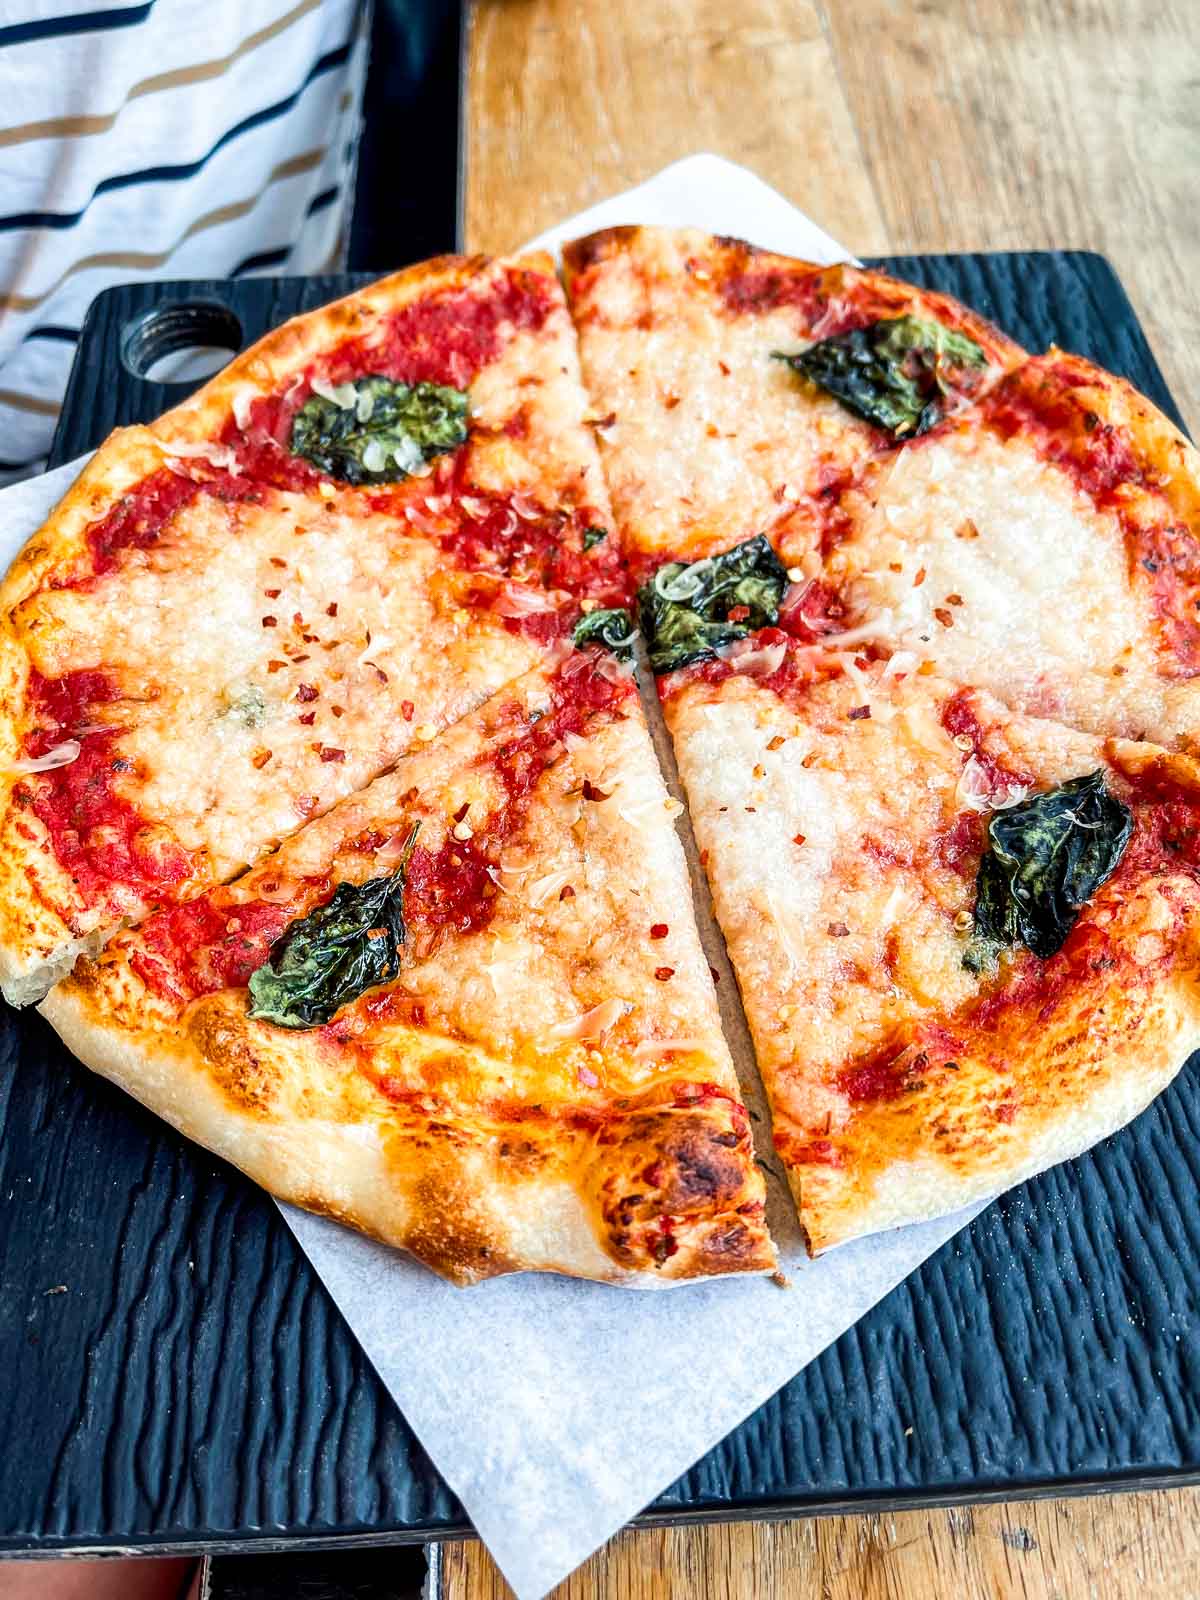 25 Best Vegan Restaurants in Vancouver BC for 2023 - margherita pizza from Virtuous Pie